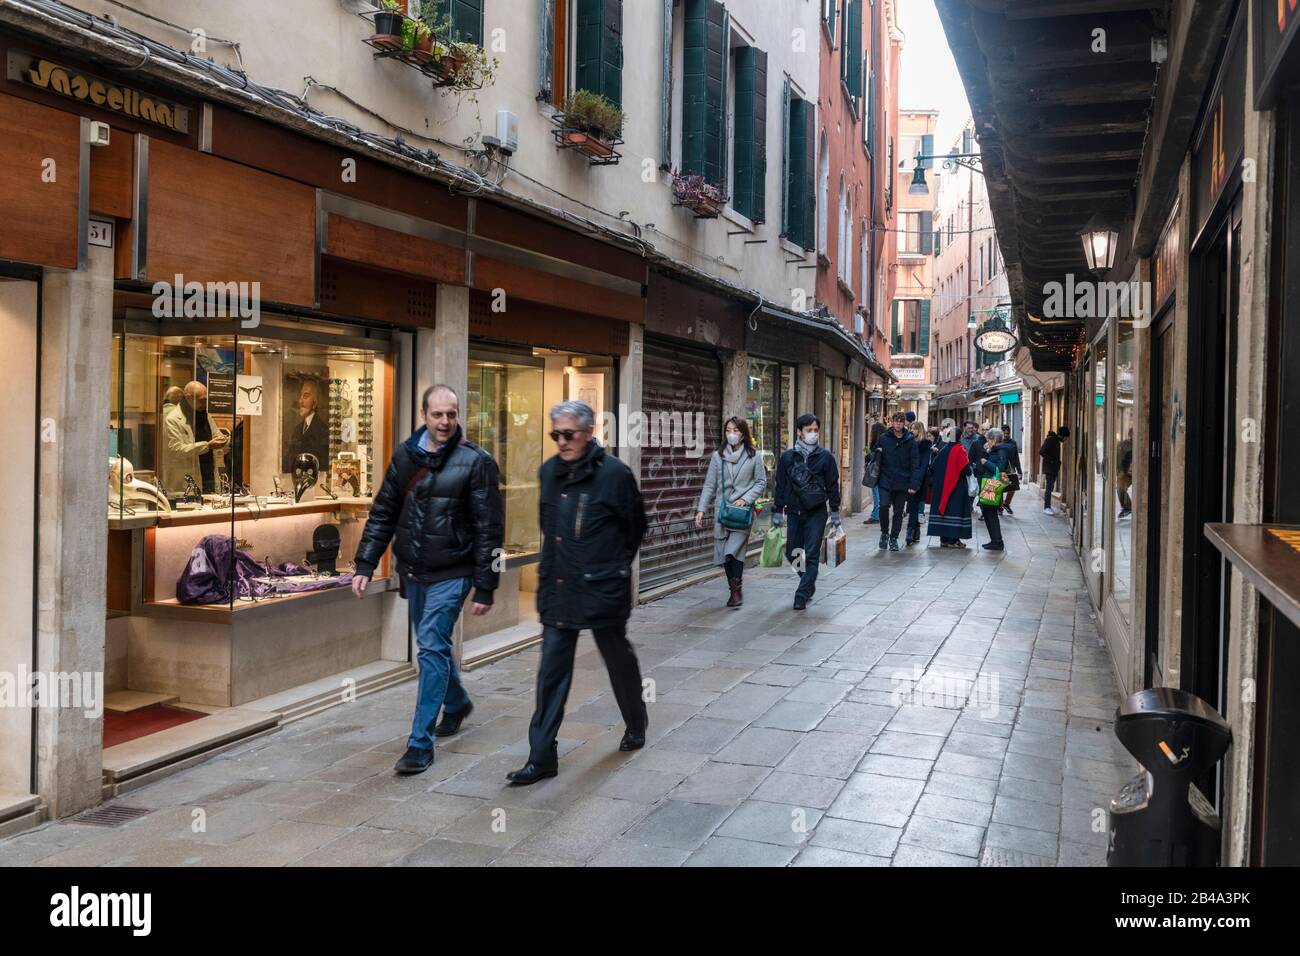 Venice, February 25th - March 3rd. 2020: Venice streets deserted due to Coronavirus pandemic. Piazza's and streets are empty apart from a handful of tourists and locals going about their daily business. Nany tourists cancel their visit for fear of catching the virus. Tourists from Japan and other far eastern countries like Taiwan  often wear surgical masks as a preventative measure. Stock Photo